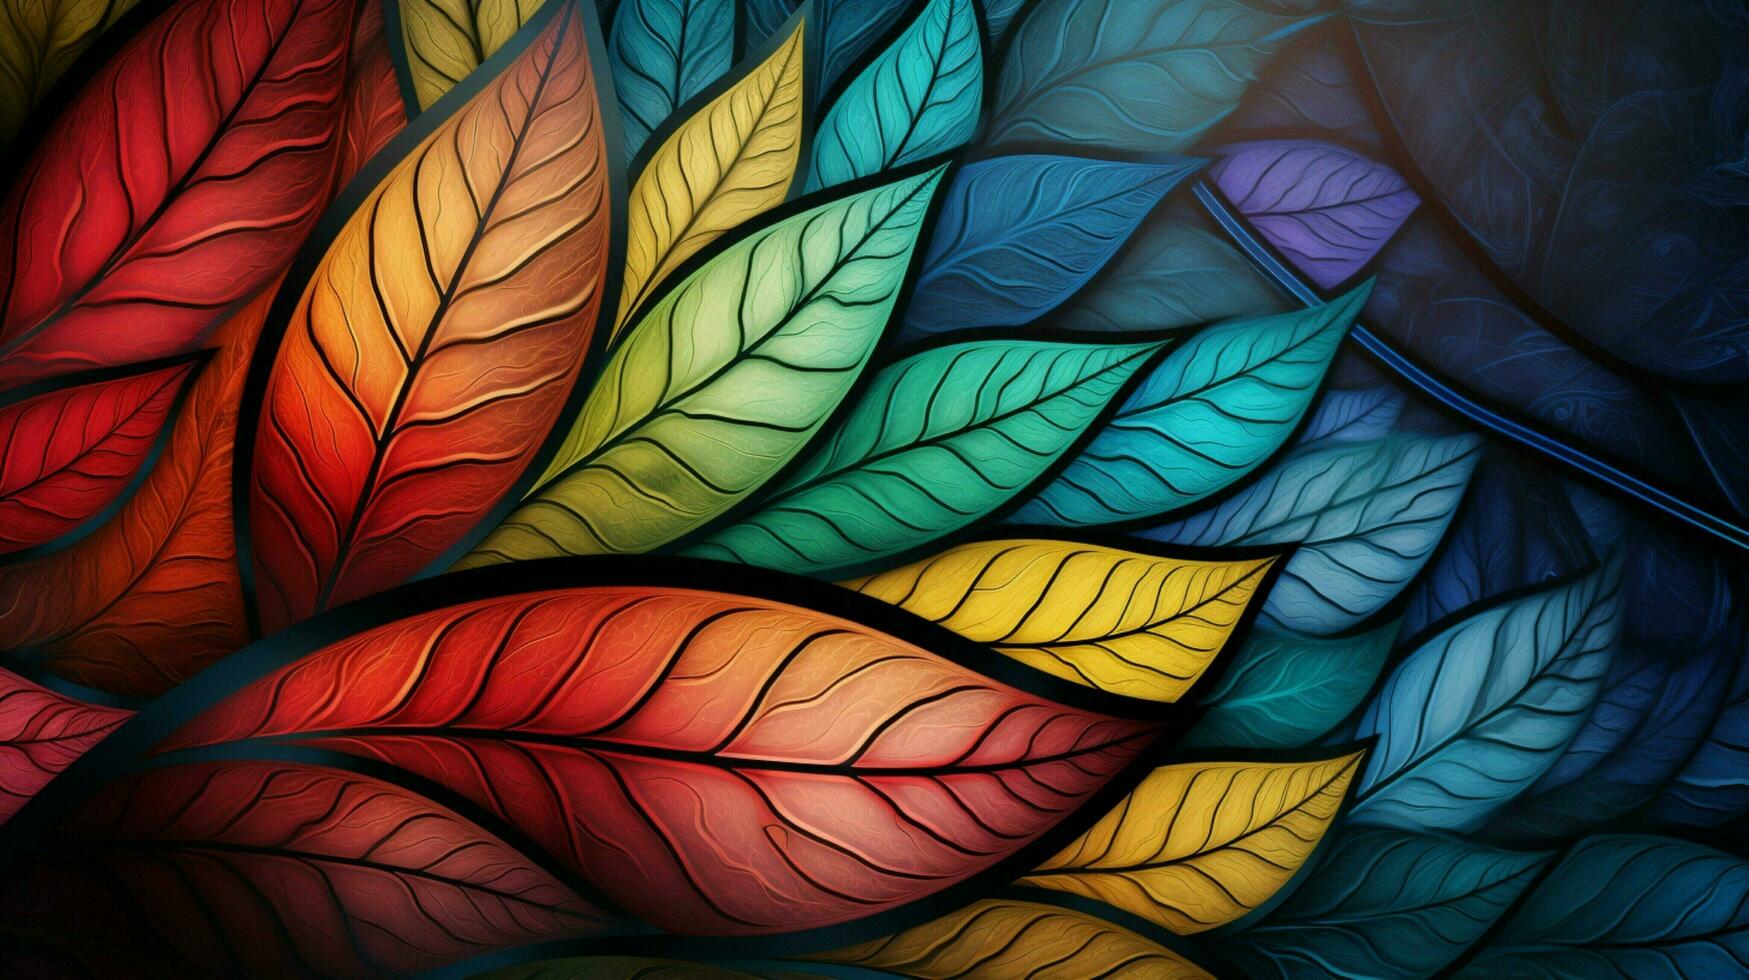 abstract design with colorful patterns on nature leaf photo